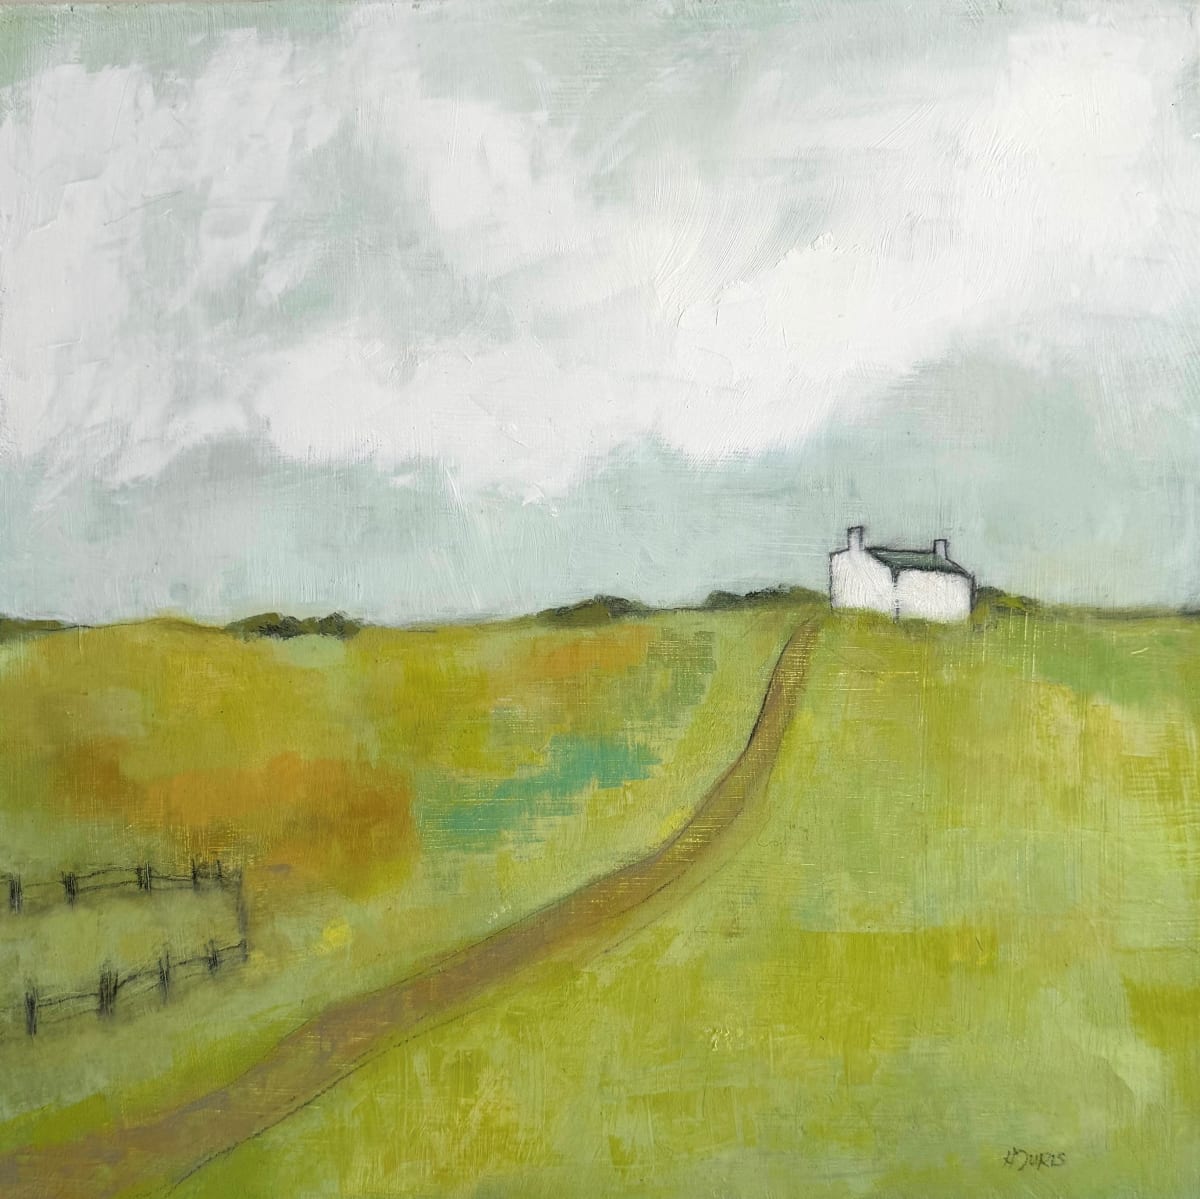 White Farmhouse by Heather Duris  Image: Country scene of rolling hills and quaint white farmhouse